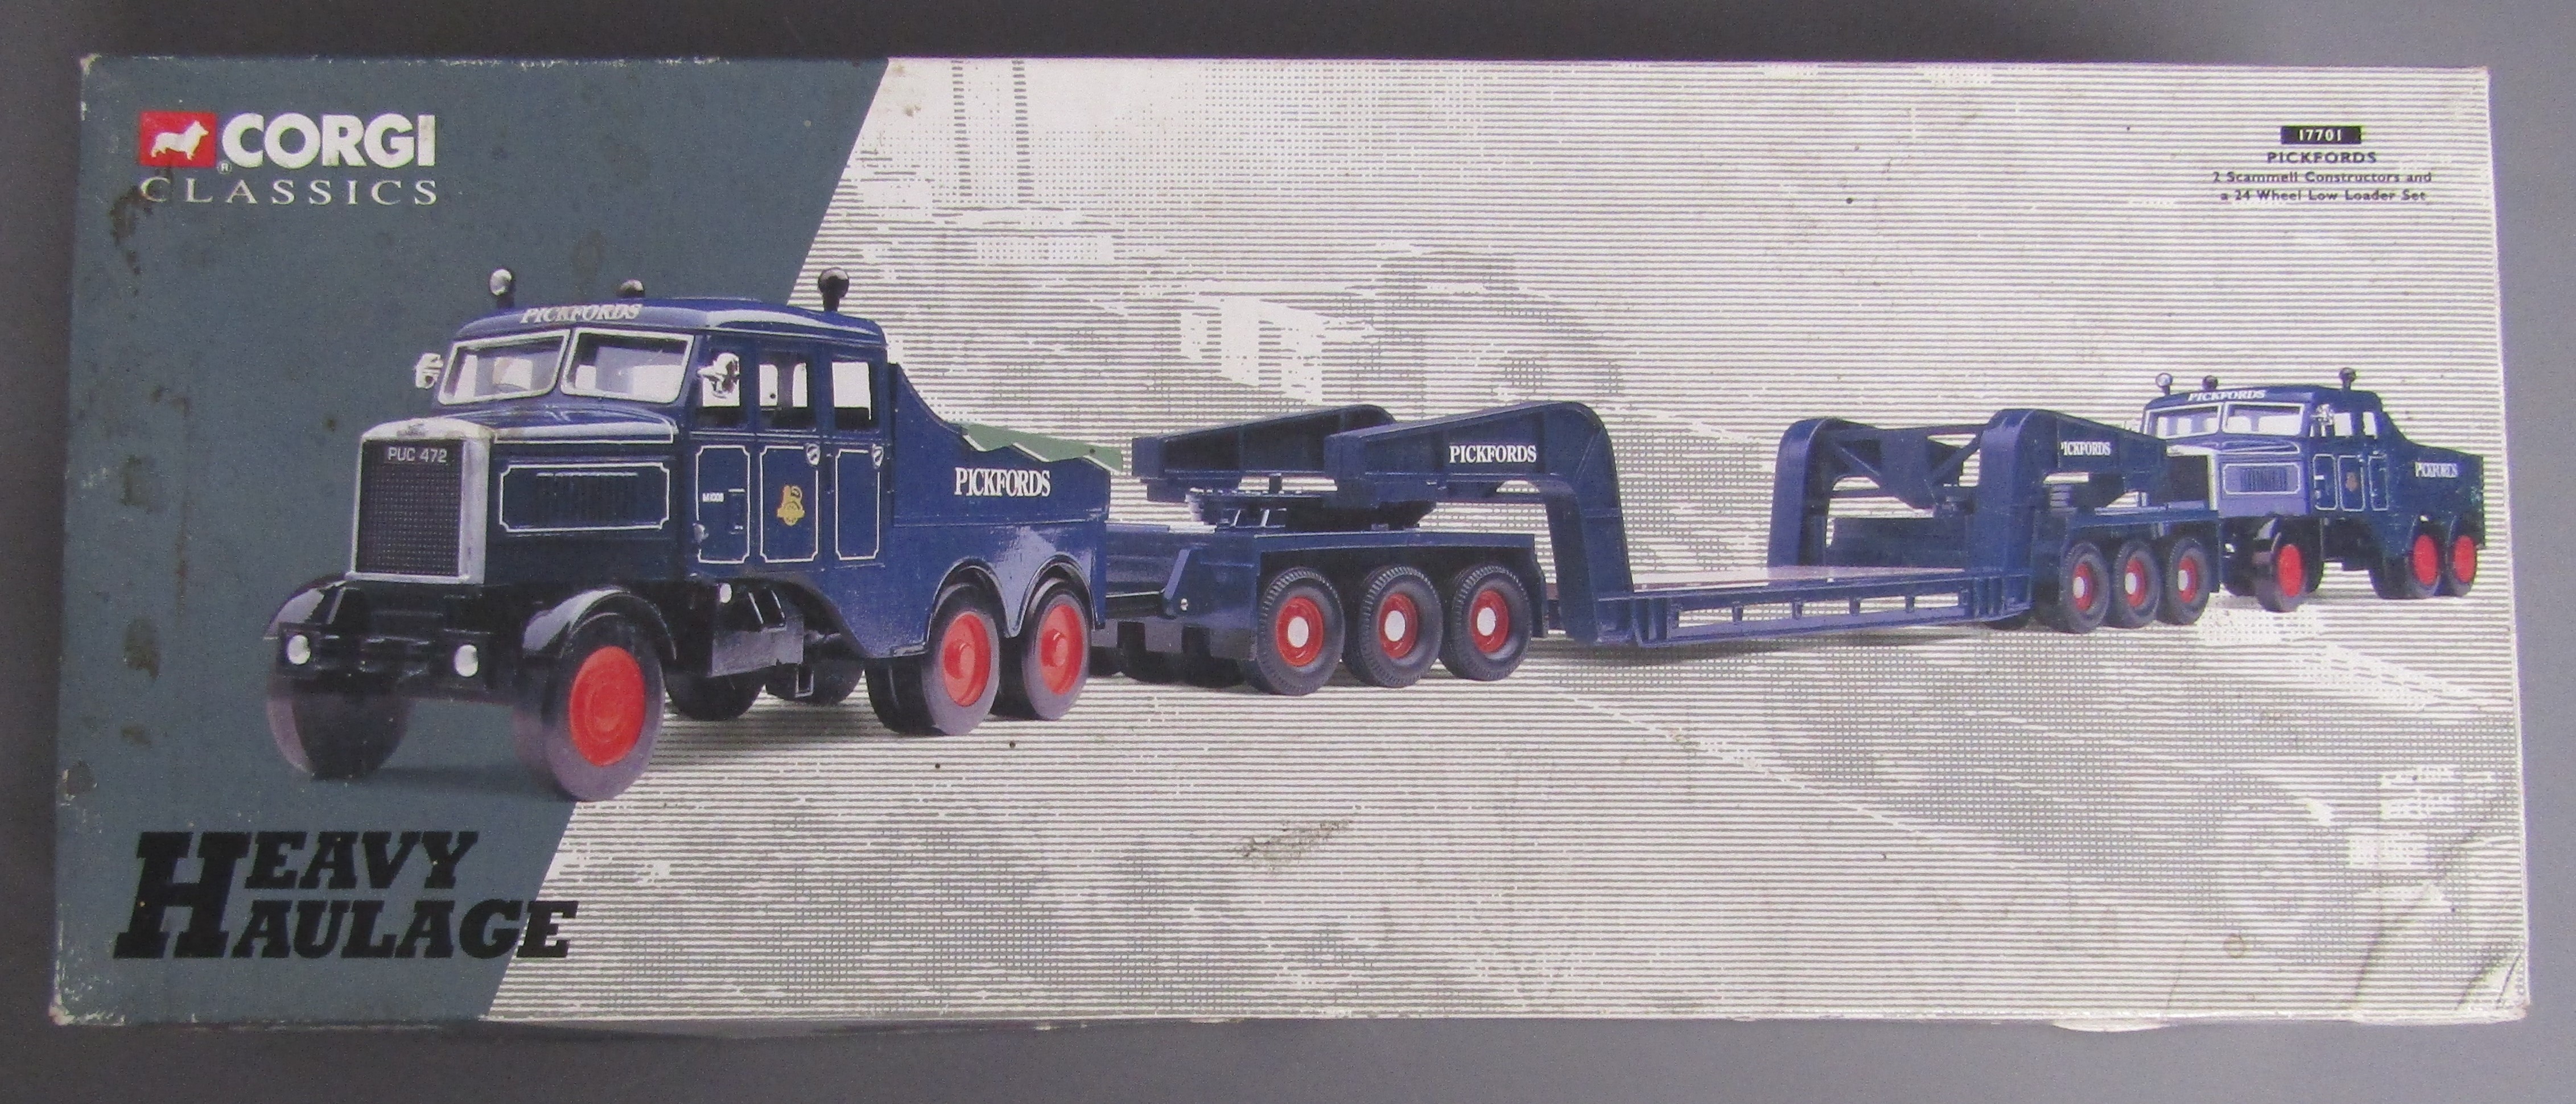 Corgi Classics Heavy Haulage 17701 Pickfords Scammell Constructors and 24 wheel low loader set and - Image 3 of 7